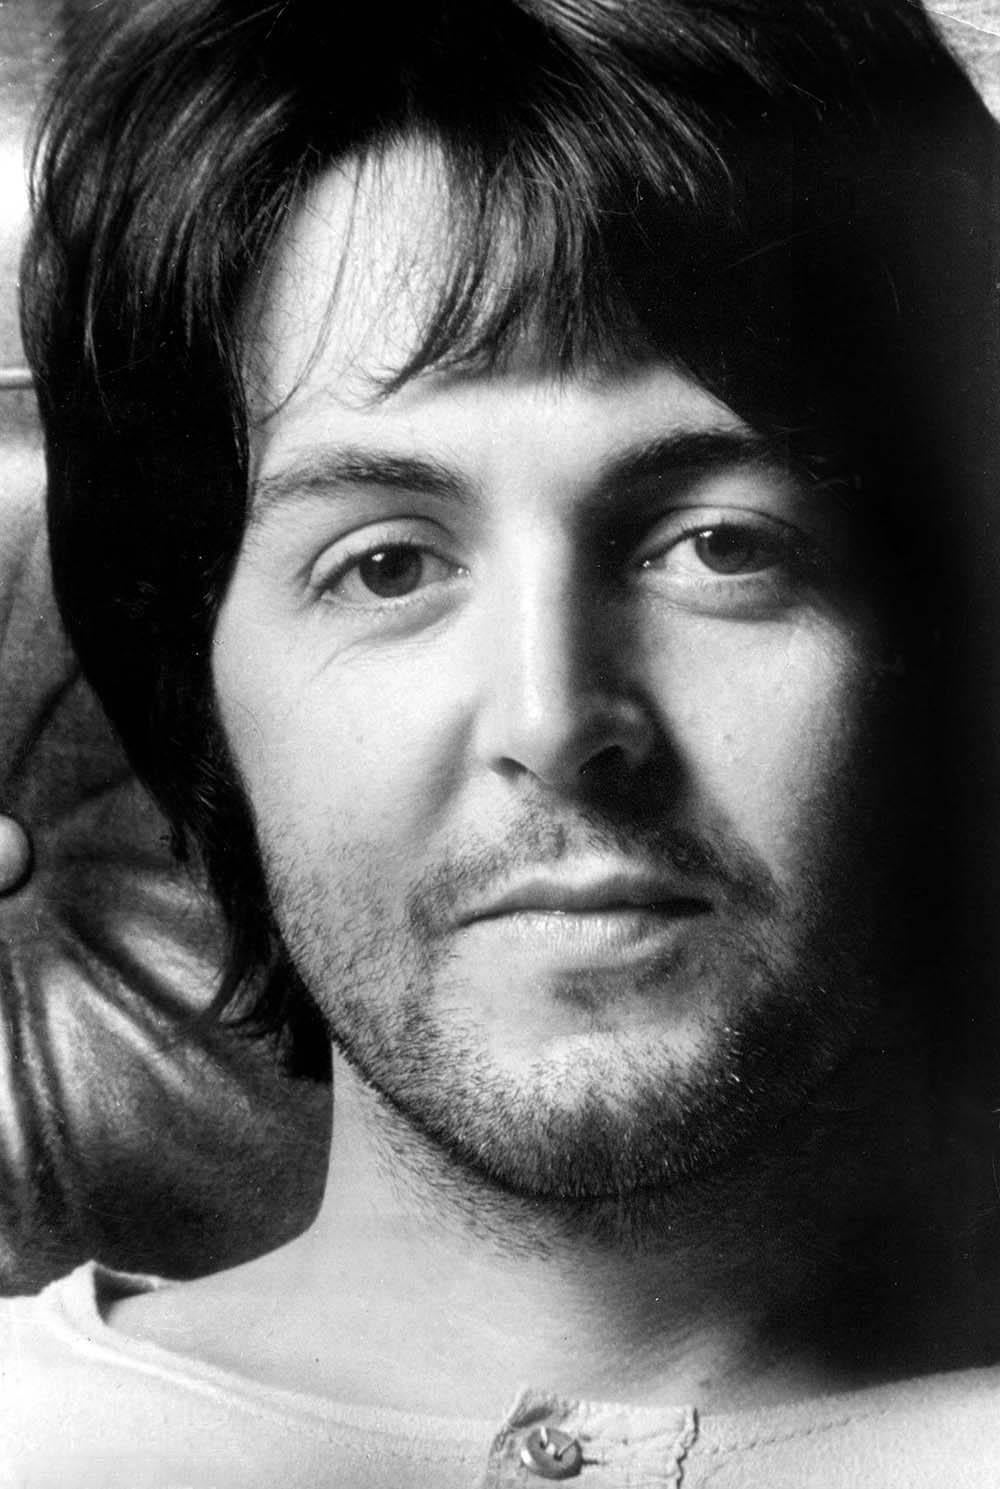 Unknown Black and White Photograph - Paul McCartney Up Close Fine Art Print